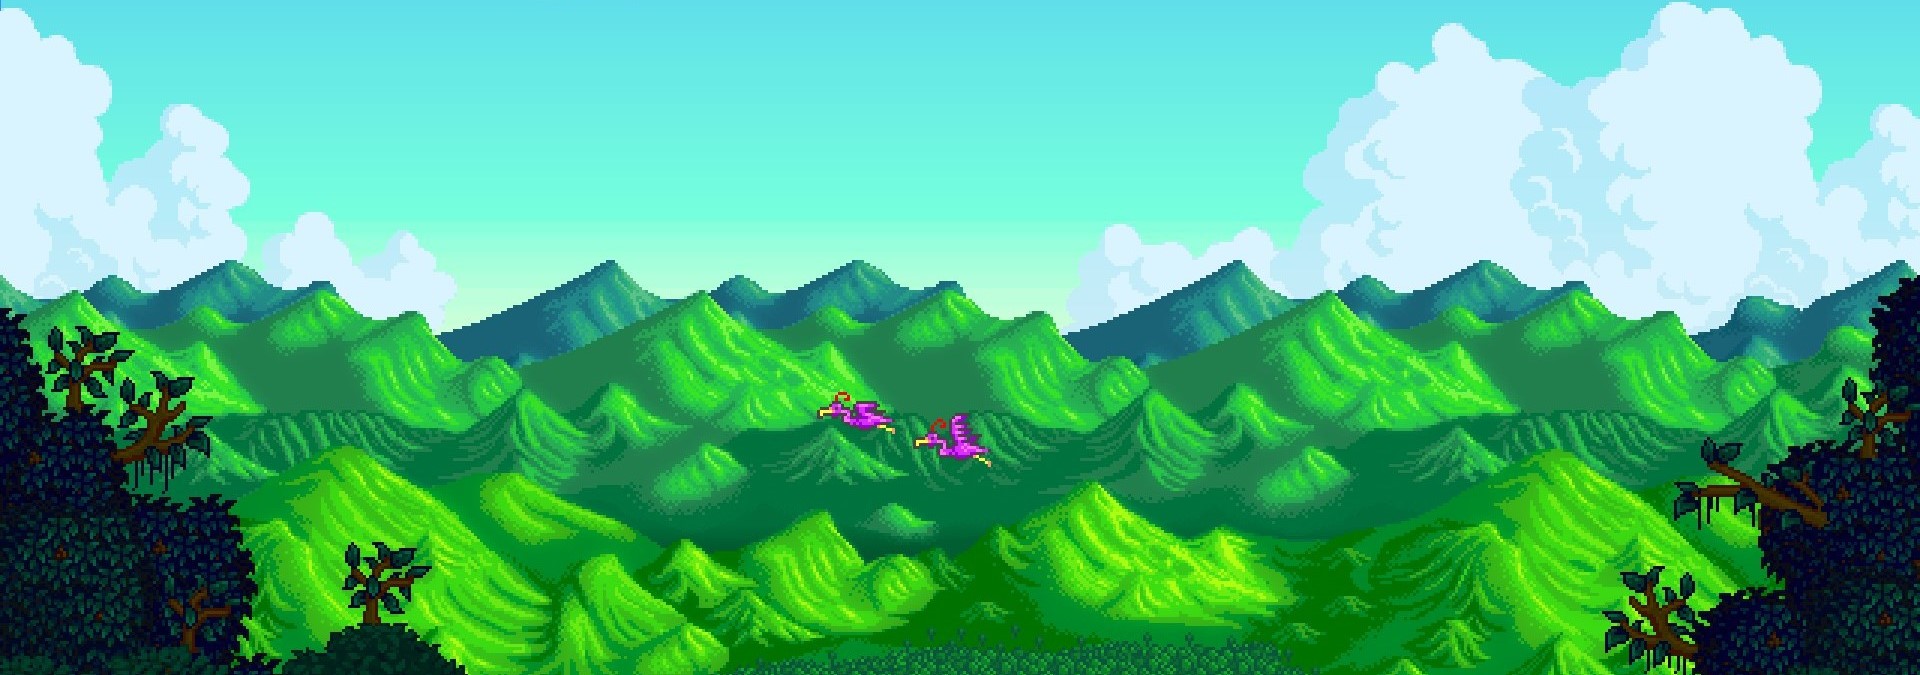 a banner image of a stardew valley background. There are green hills in the background and bushes with branches and leaves sticking out in the foregound. There are two flamingos flying over the valley